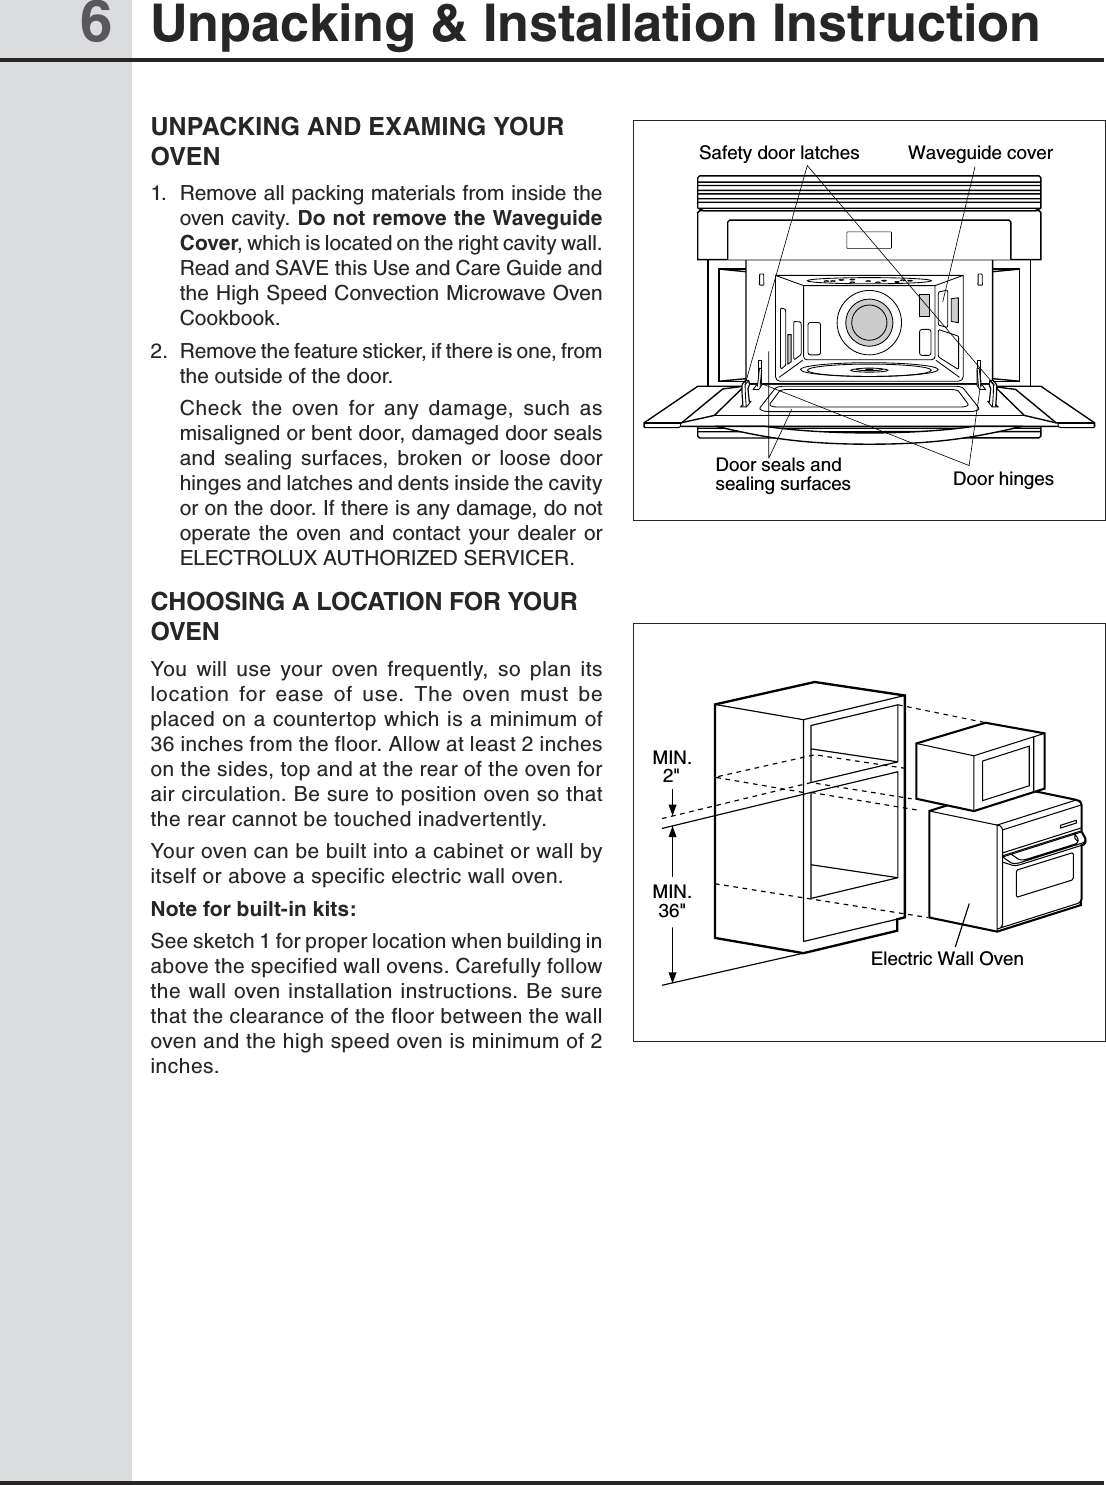 6Unpacking &amp; Installation InstructionUNPACKING AND EXAMING YOUR OVEN1.  Remove all packing materials from inside the oven cavity. Do not remove the Waveguide Cover, which is located on the right cavity wall. Read and SAVE this Use and Care Guide and the High Speed Convection Microwave Oven Cookbook.2.  Remove the feature sticker, if there is one, from the outside of the door.  Check  the  oven  for  any  damage,  such  as misaligned or bent door, damaged door seals and  sealing  surfaces,  broken  or  loose  door hinges and latches and dents inside the cavity or on the door. If there is any damage, do not operate  the  oven and  contact  your  dealer or ELECTROLUX AUTHORIZED SERVICER.CHOOSING A LOCATION FOR YOUR OVENYou  will  use  your  oven  frequently,  so  plan  its location  for  ease  of  use.  The  oven  must  be placed on a countertop which is a minimum of 36 inches from the floor. Allow at least 2 inches on the sides, top and at the rear of the oven for air circulation. Be sure to position oven so that the rear cannot be touched inadvertently.Your oven can be built into a cabinet or wall by itself or above a specific electric wall oven.Note for built-in kits:See sketch 1 for proper location when building in above the specified wall ovens. Carefully follow the wall oven installation instructions. Be sure that the clearance of the floor between the wall oven and the high speed oven is minimum of 2 inches.Door hingesSafety door latches Waveguide coverDoor seals andsealing surfacesMIN.2&quot;Electric Wall OvenMIN.36&quot;